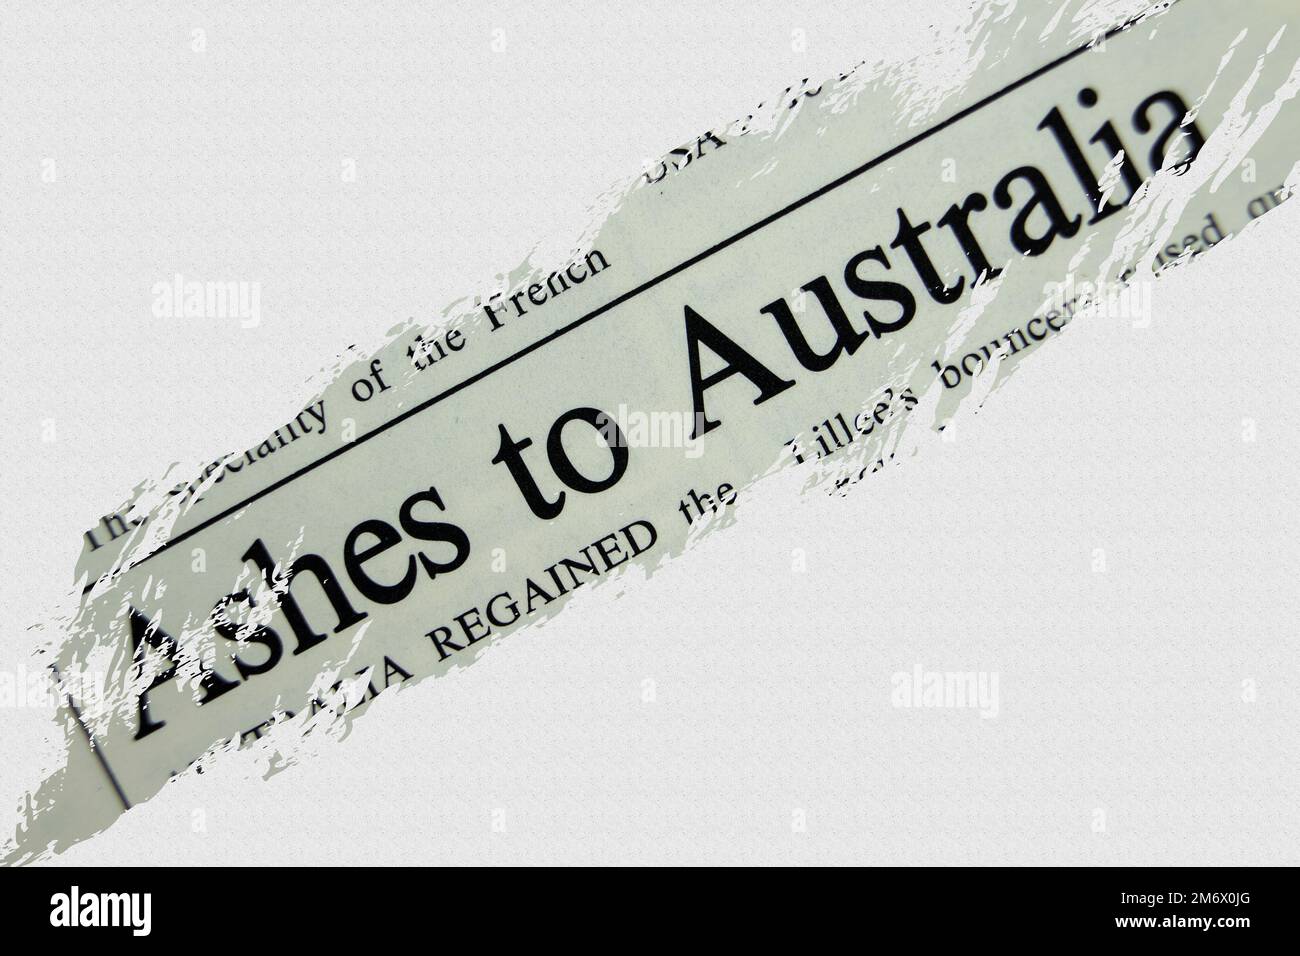 news story from 1975 newspaper headline article title - Ashes to Australia Stock Photo